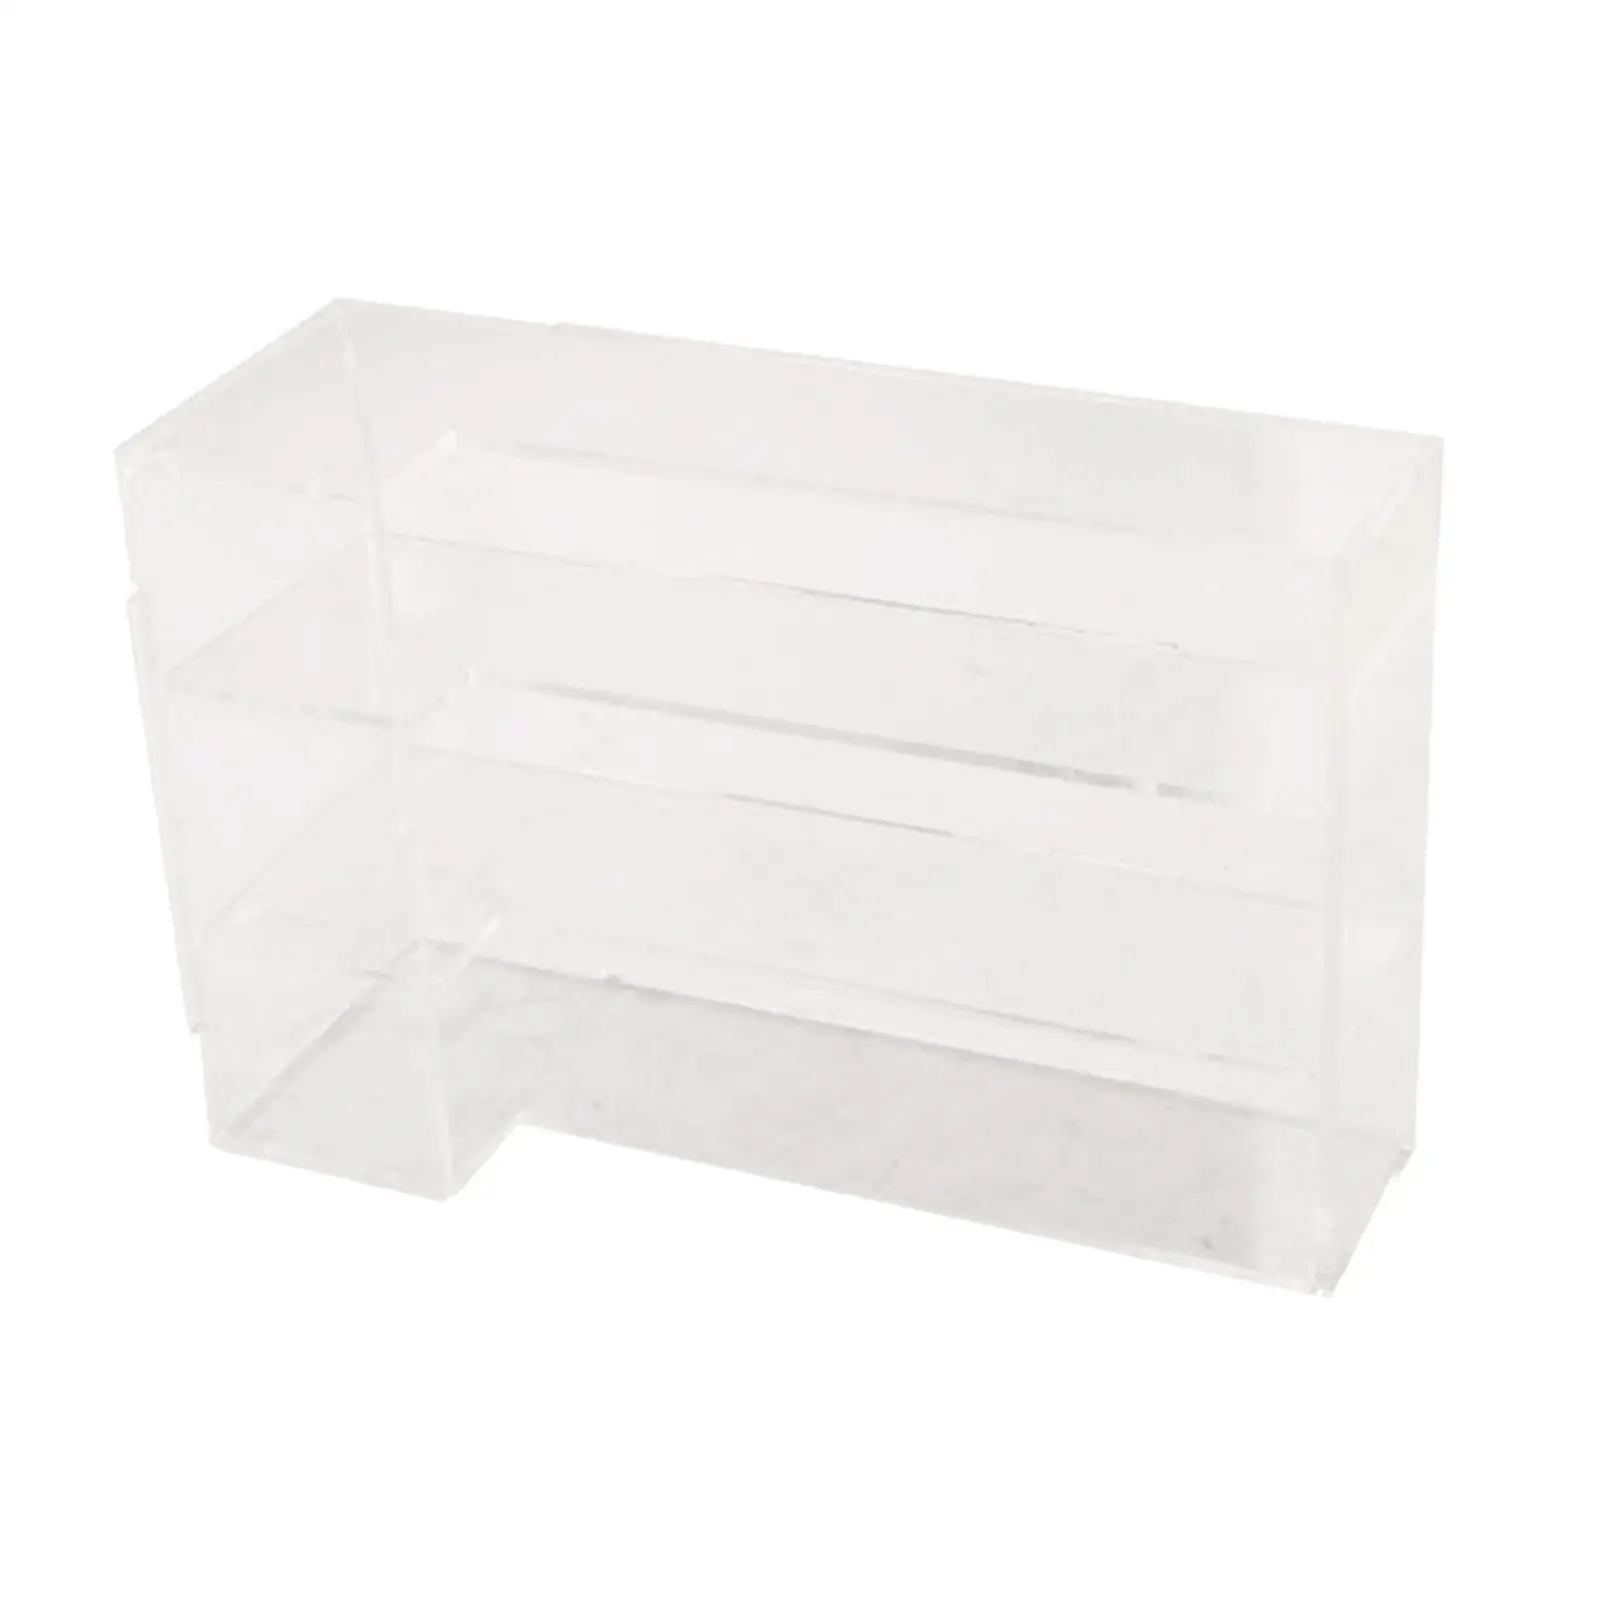 Miniature Store Acrylic Display Cabinet 1/12 Miniature Bakery Display Case for Diorama Kids Pretend Play Photography Props